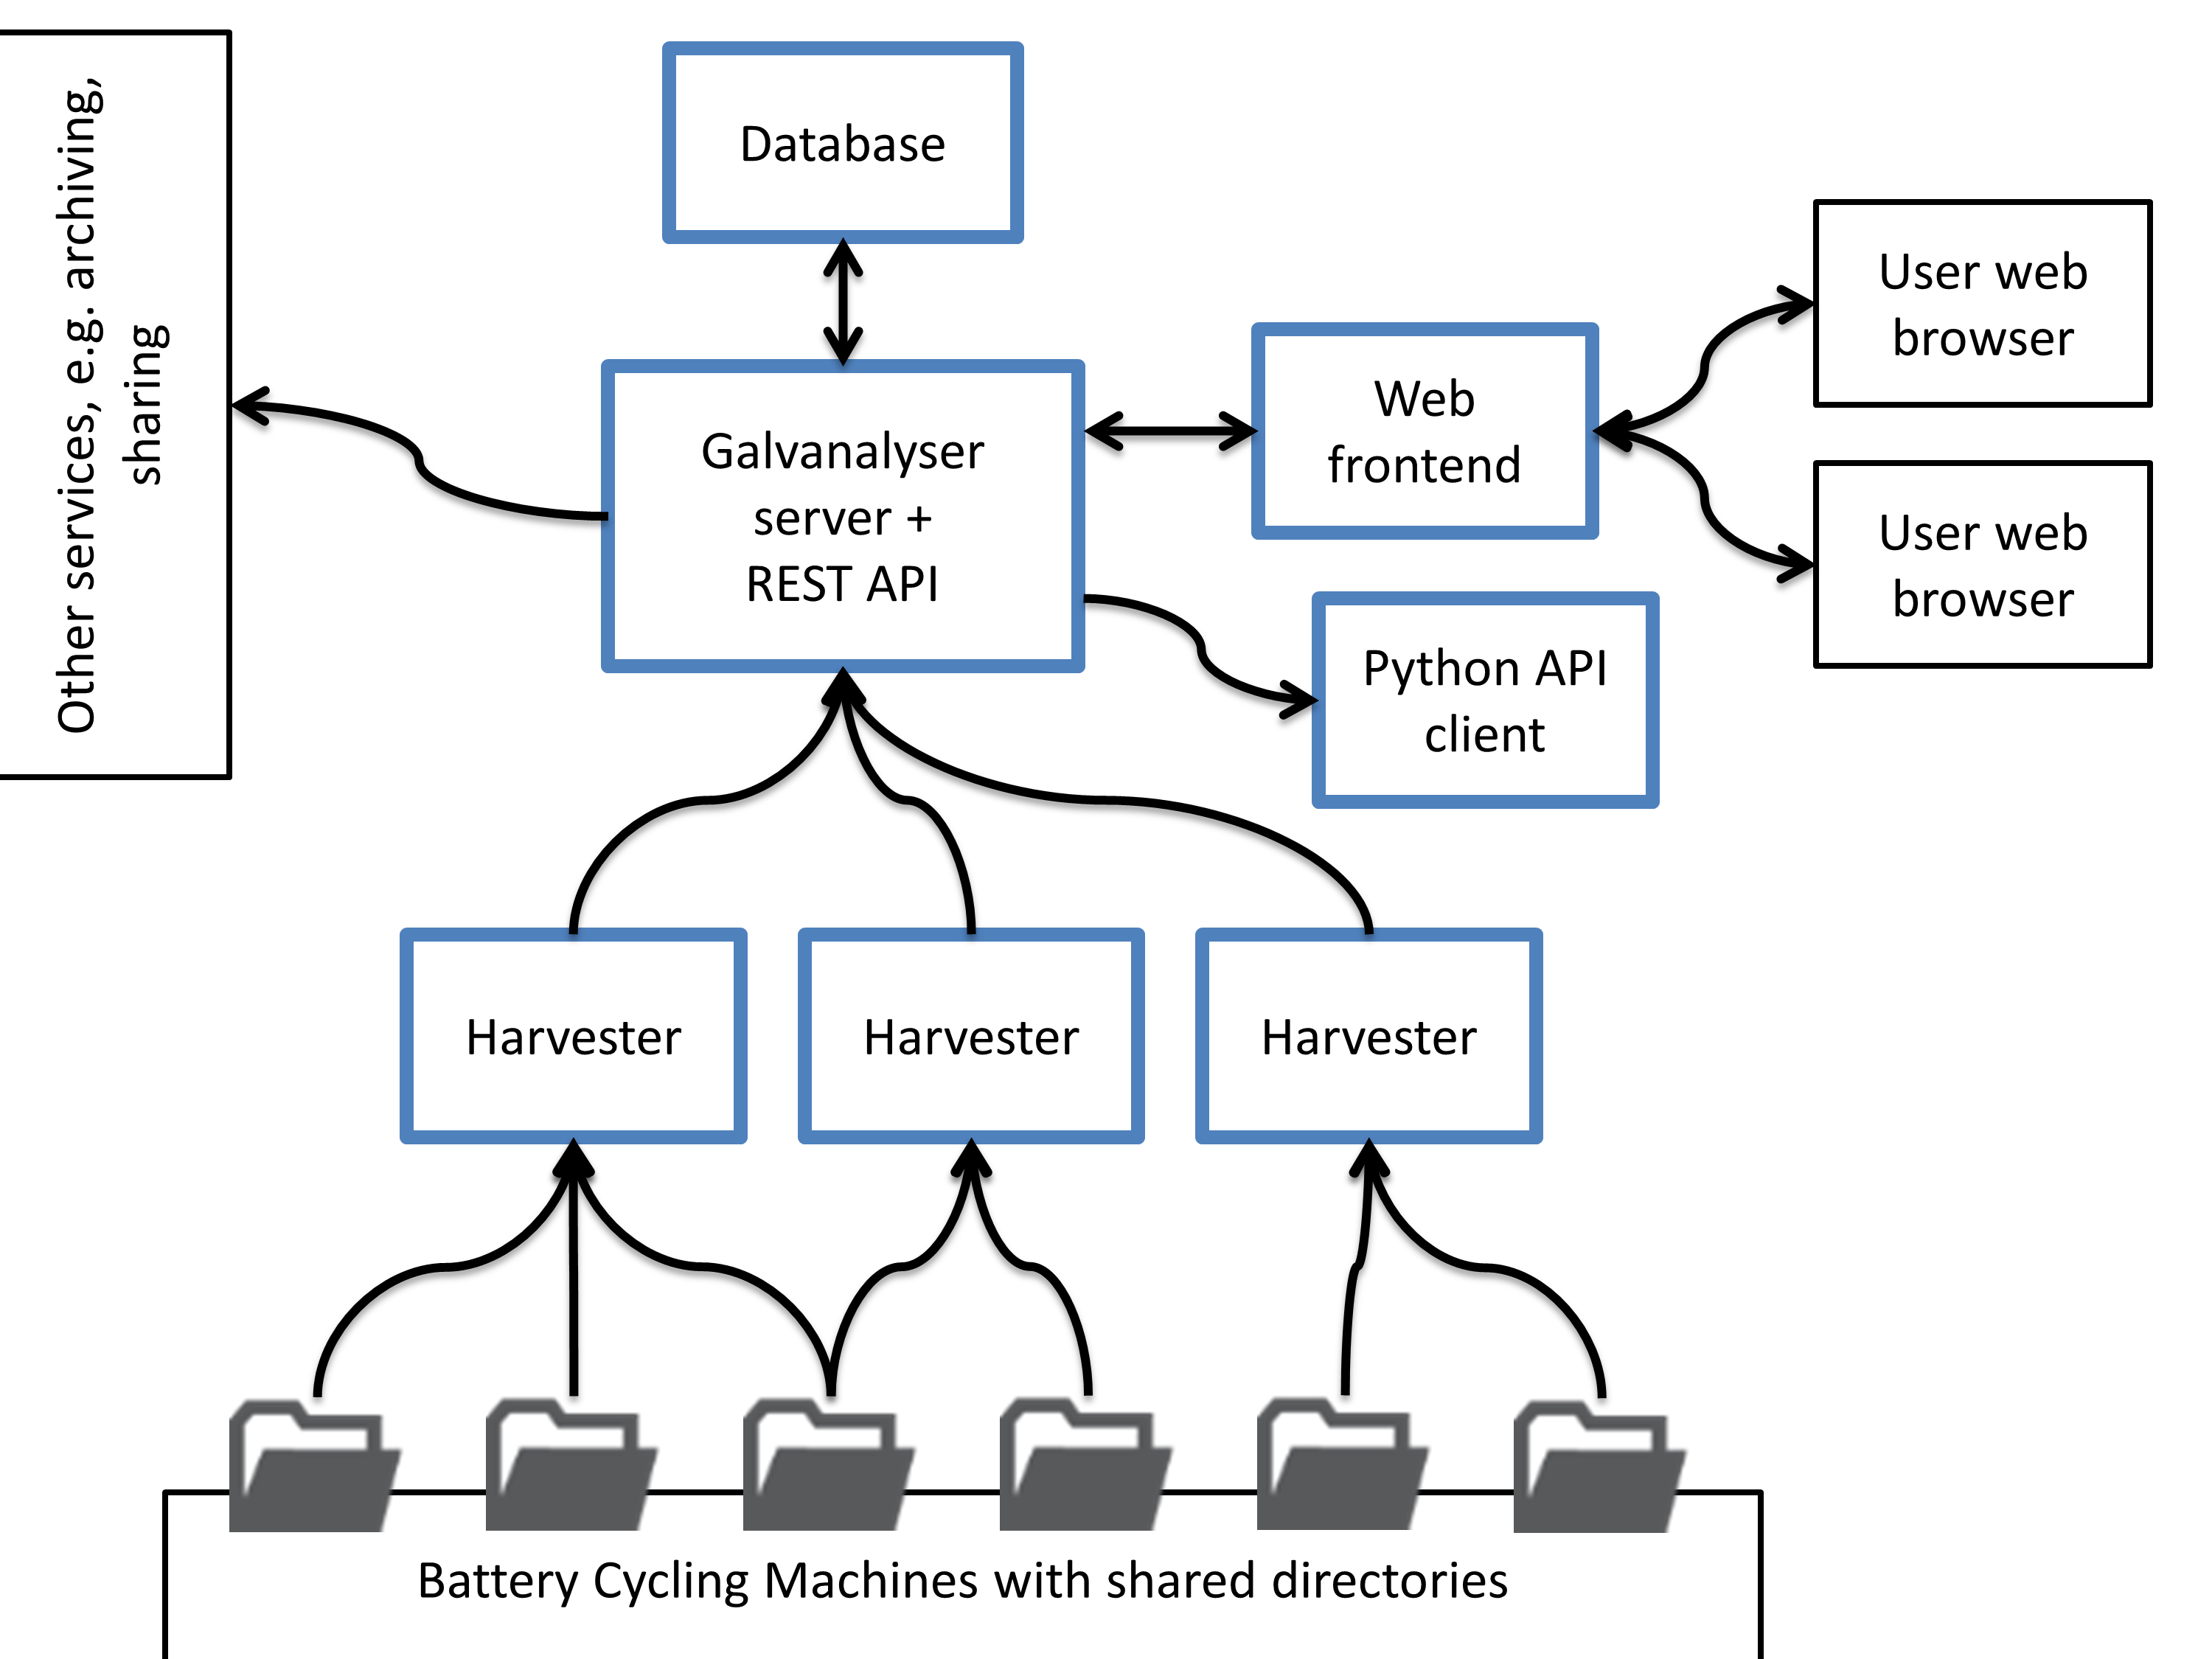 Data flows from battery cycling machines to Galv Harvesters, then to the     Galv server and REST API. Metadata can be updated and data read using the web client, and data can be downloaded by the Python client.